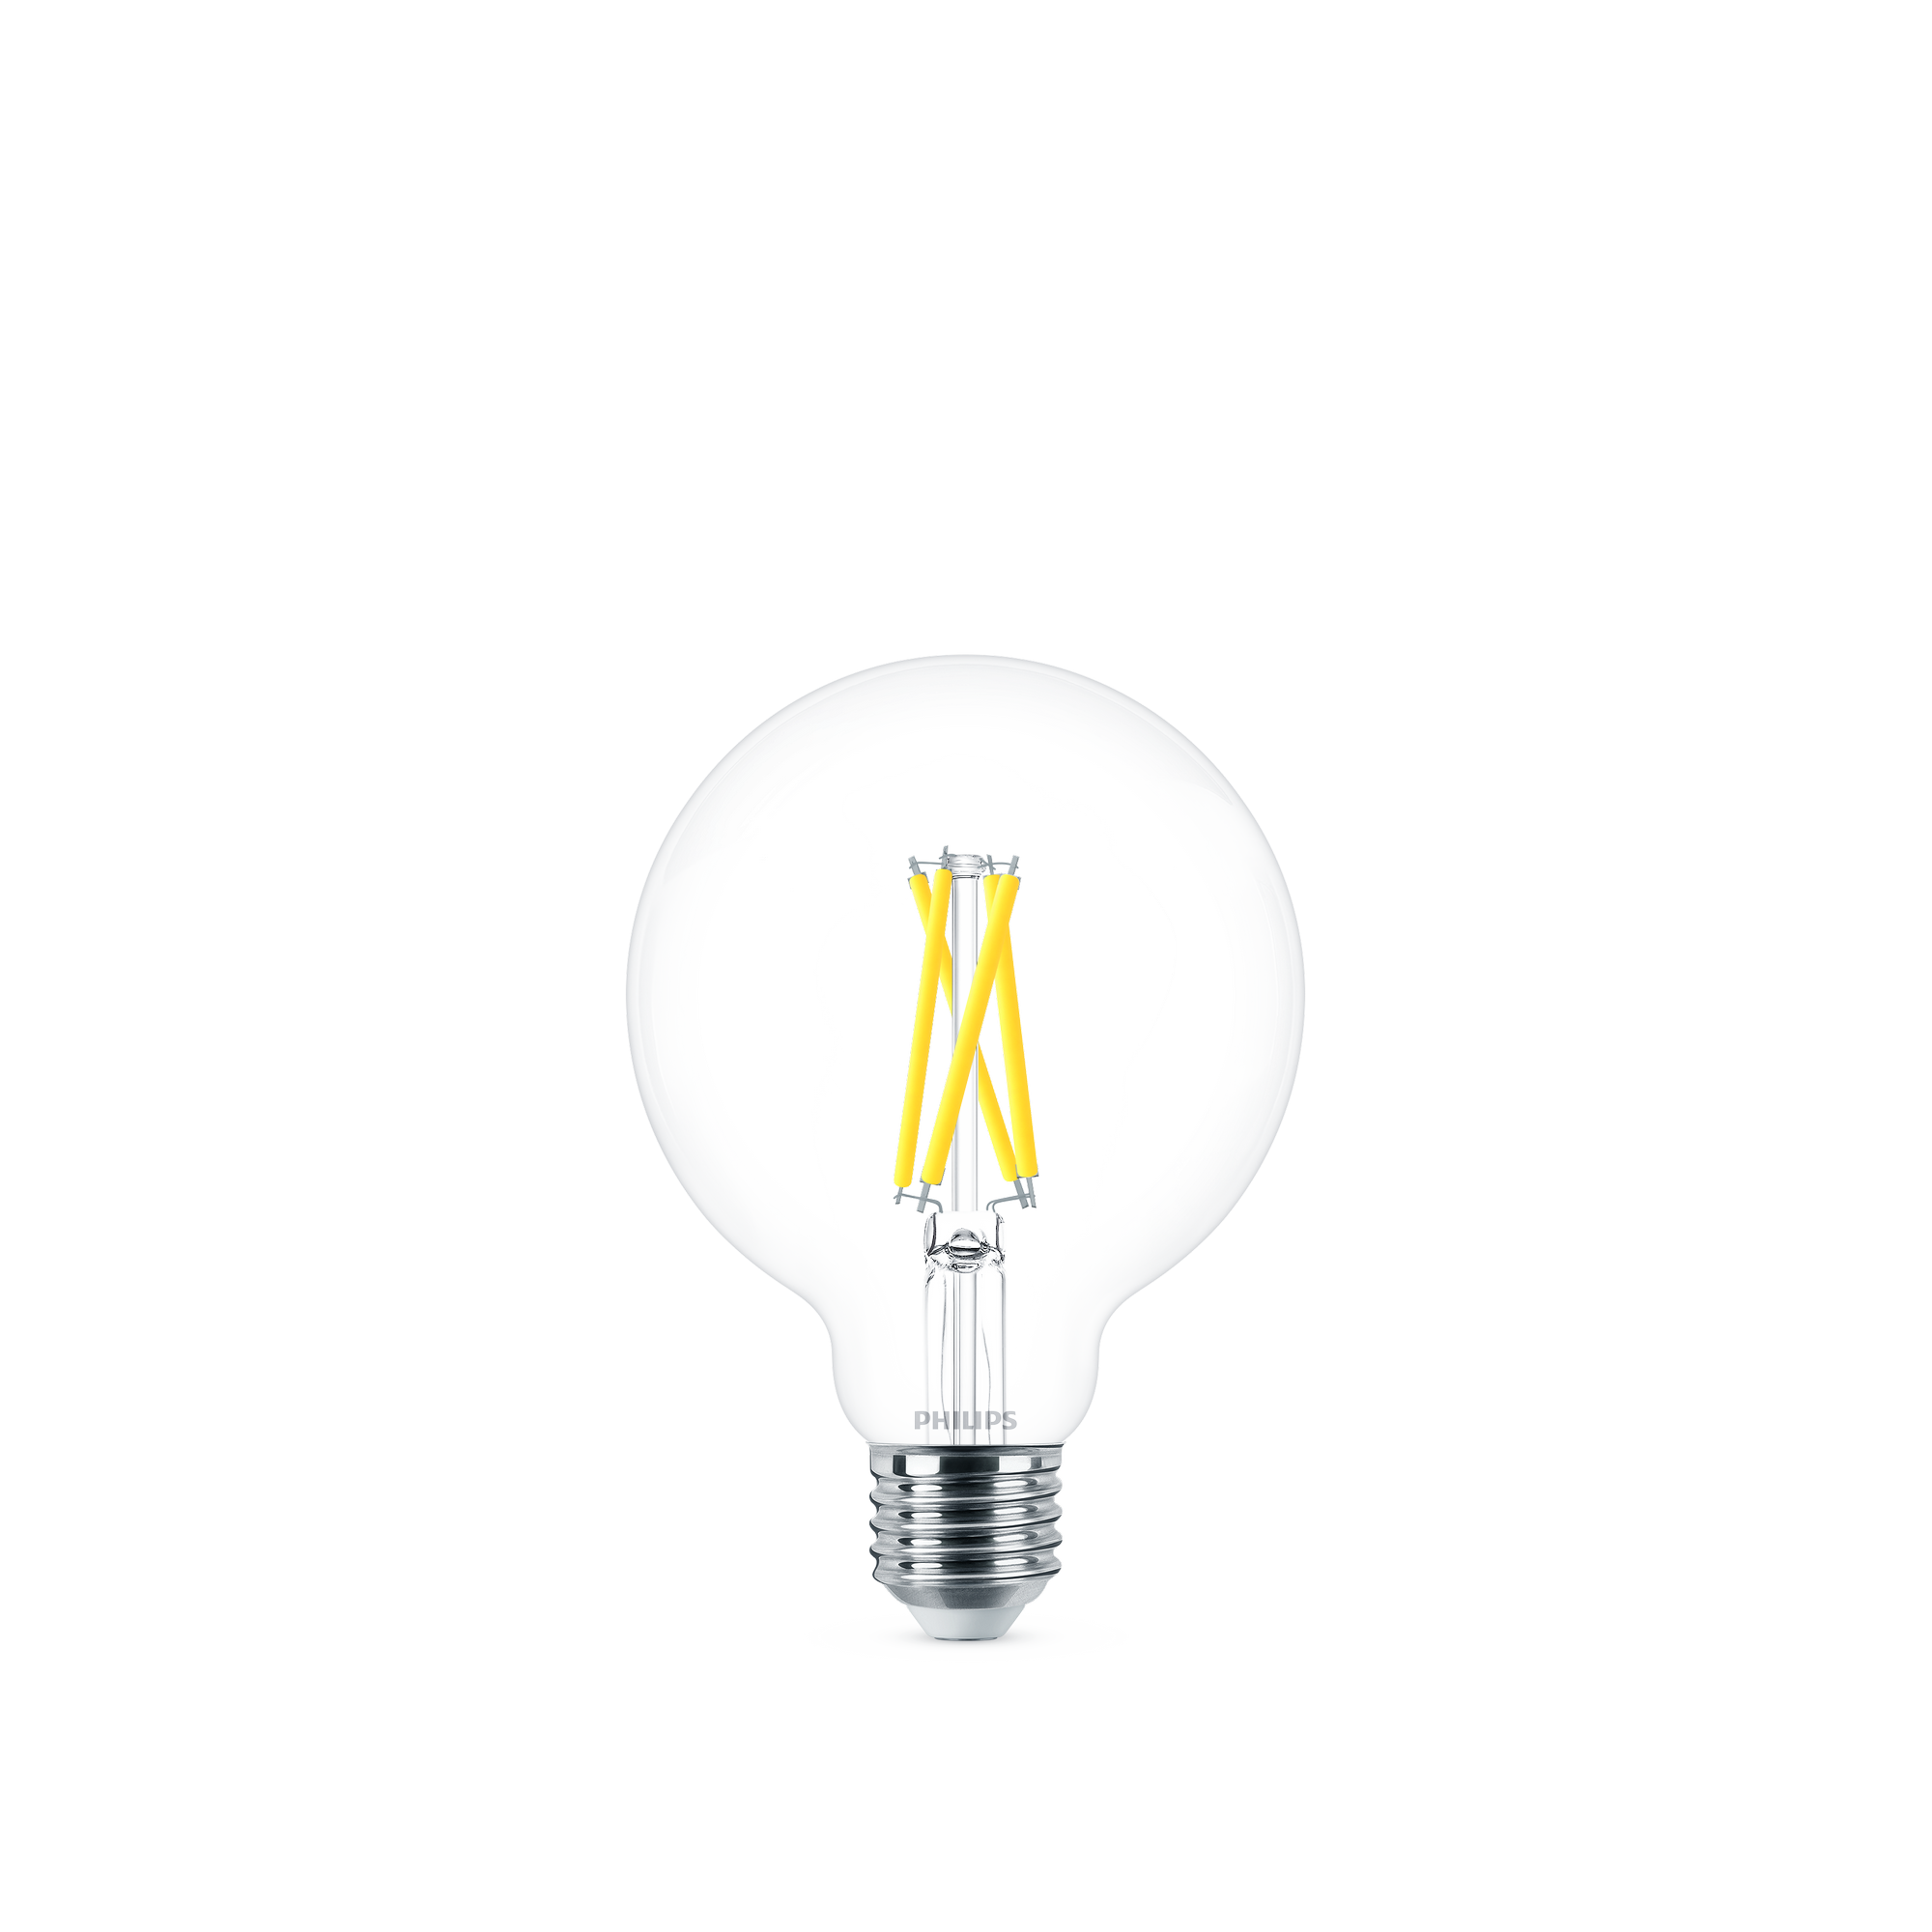 LED-Lampe 'WarmGlow' E27 6 W, dimmbar + product picture